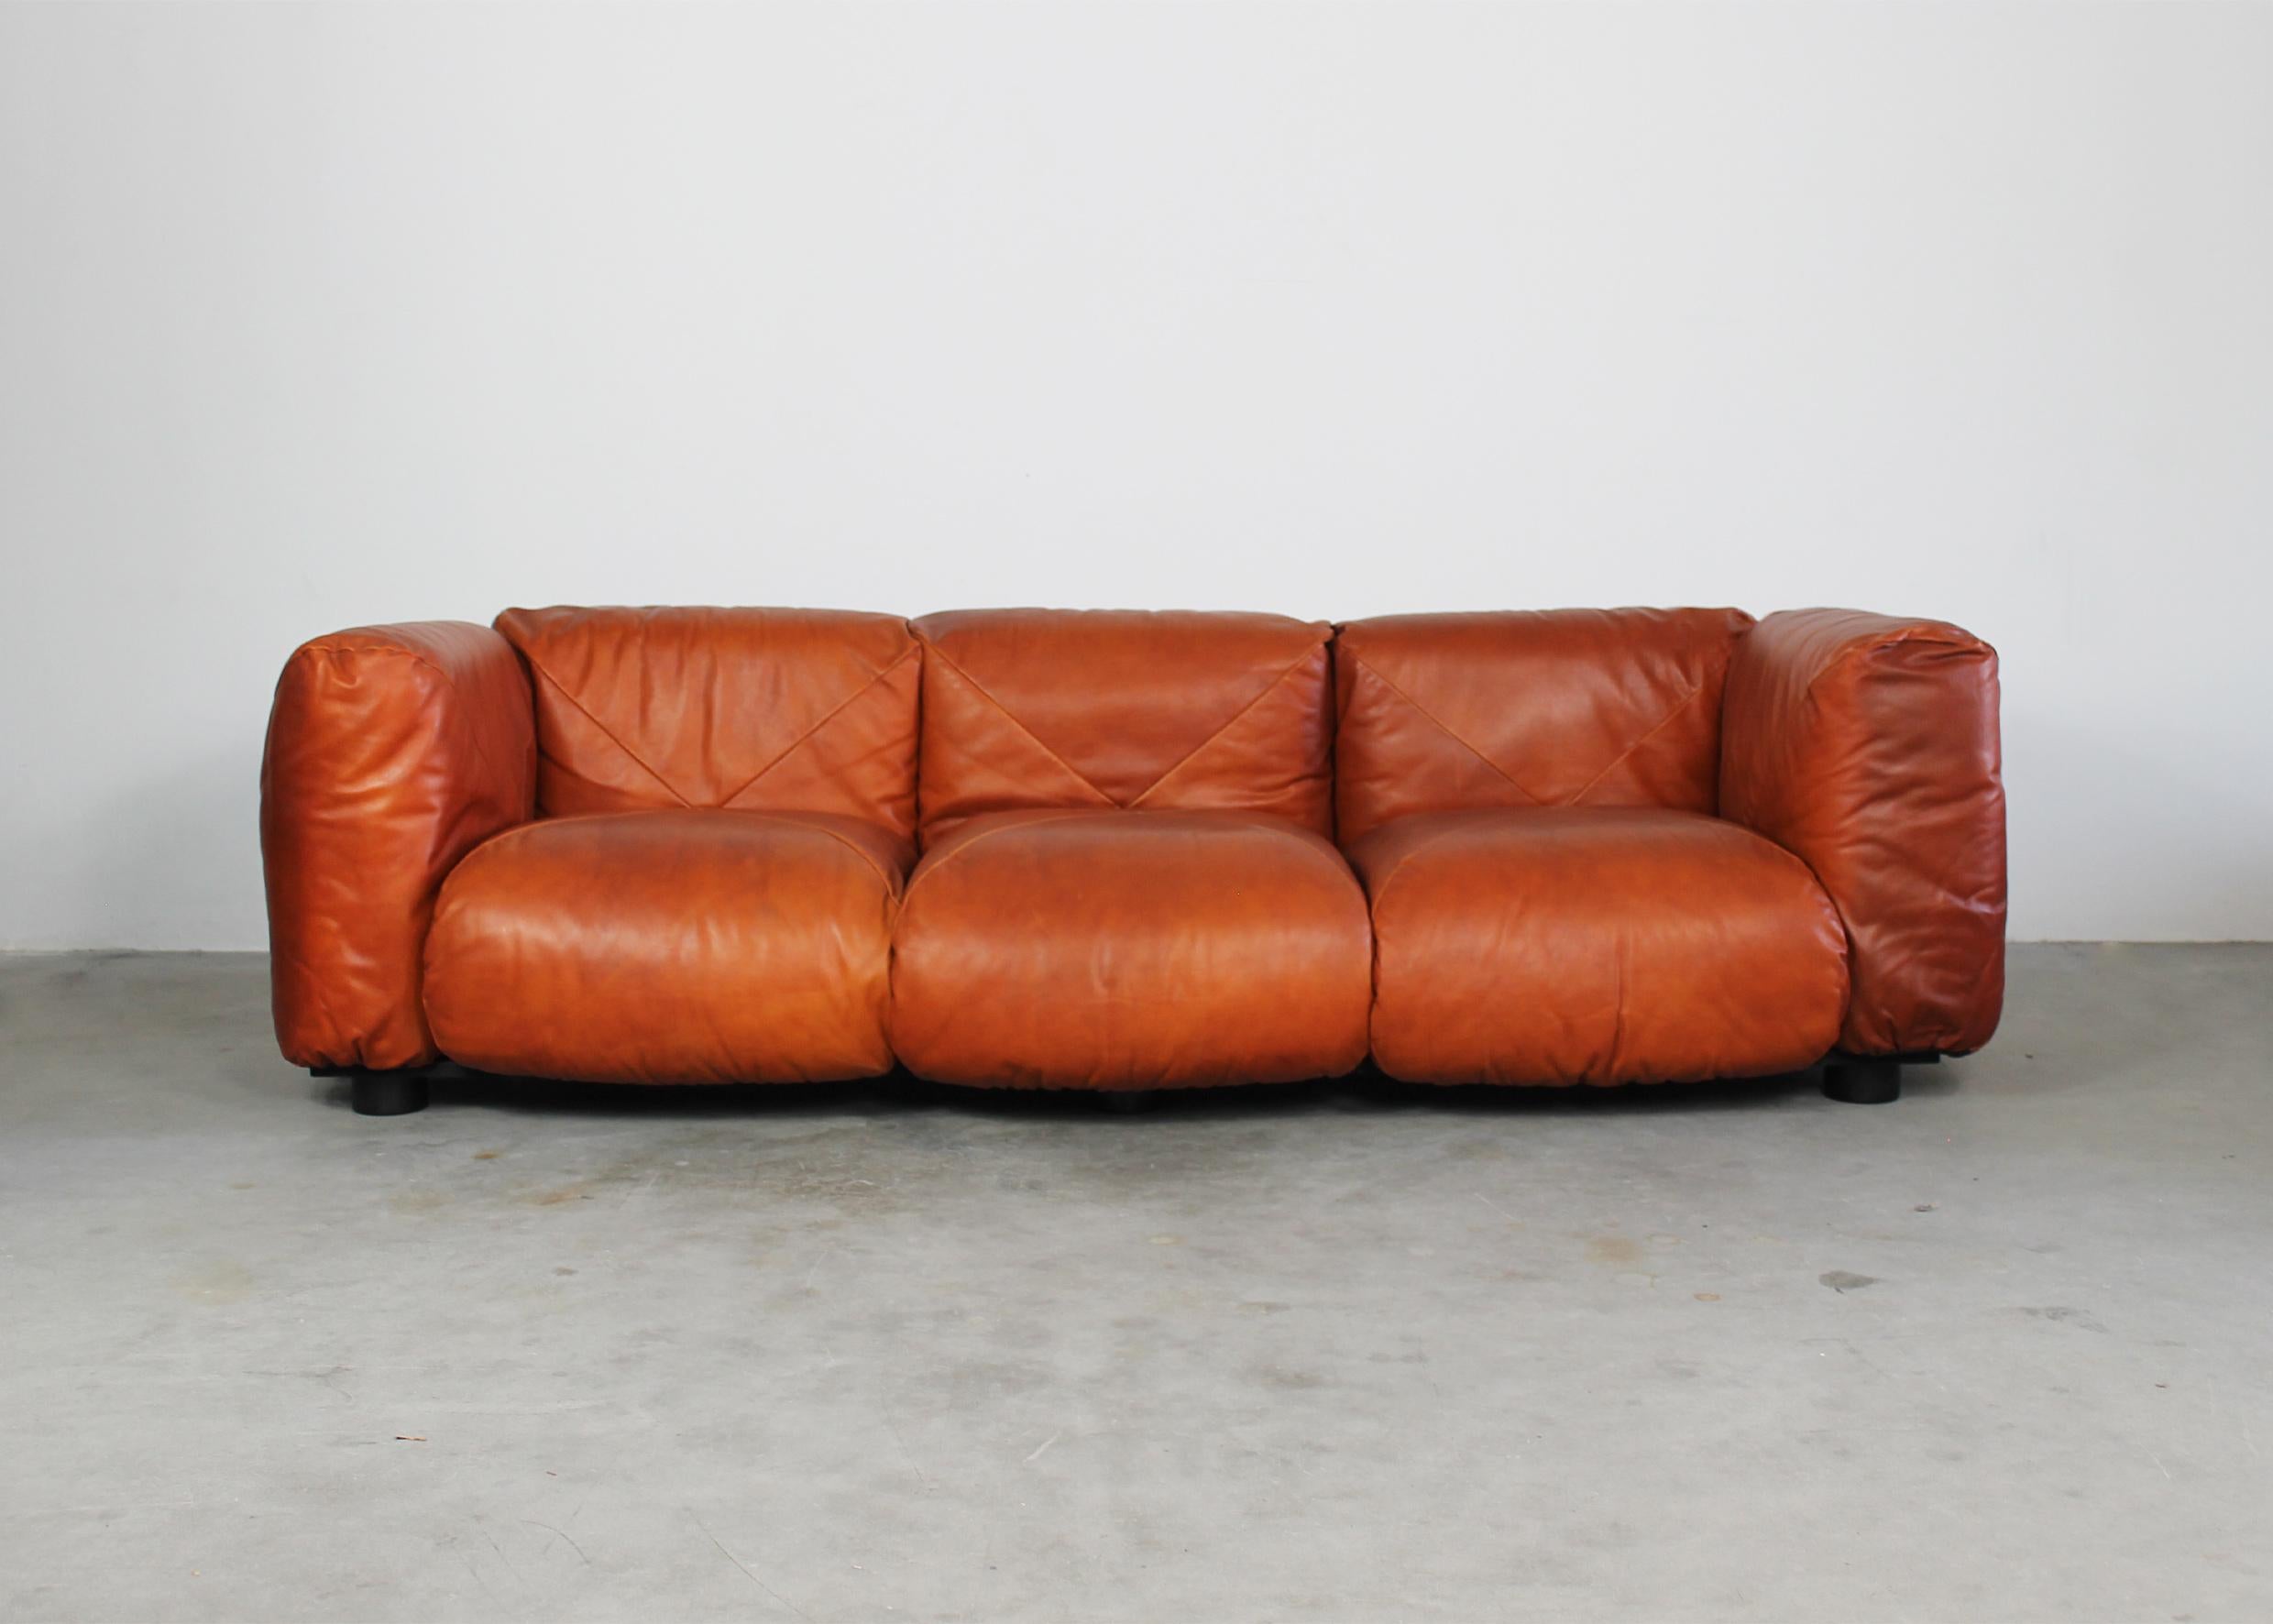 Marius & Marius three-seater sofa with structure in wood and lacquered metal, back, seat and armrests in padded cognac leather. 

Marius&Marius sofa was designed by Mario Marenco, as a part of  the Techniform series, and it was manufactured by